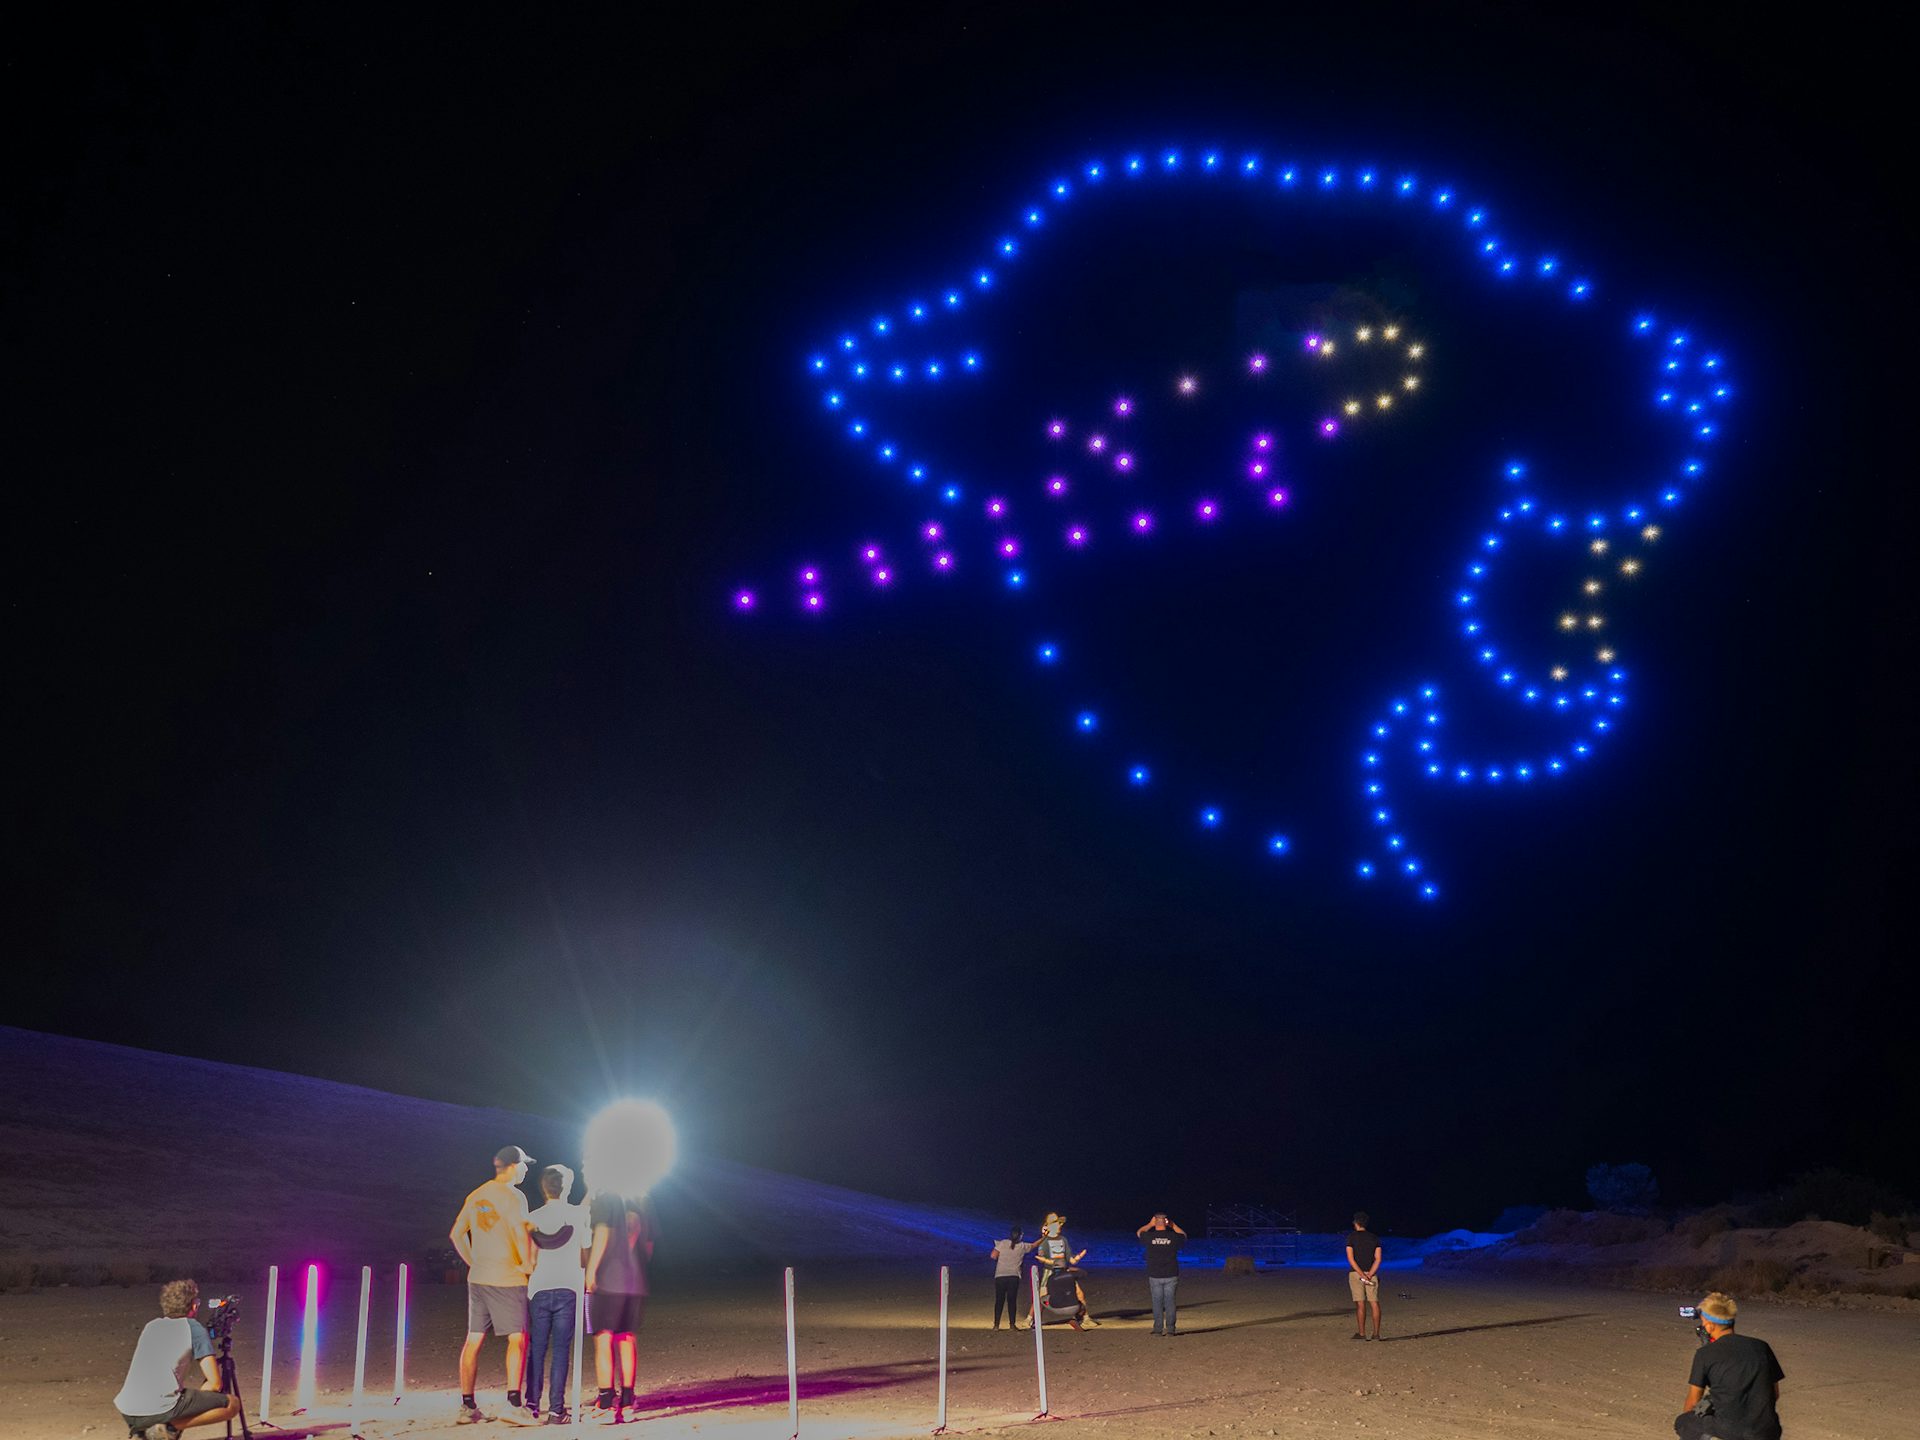 MrBeast flies uses Verge Aero X1 light show drones to spell out logos and text in the sky with Fireworks by Grucci